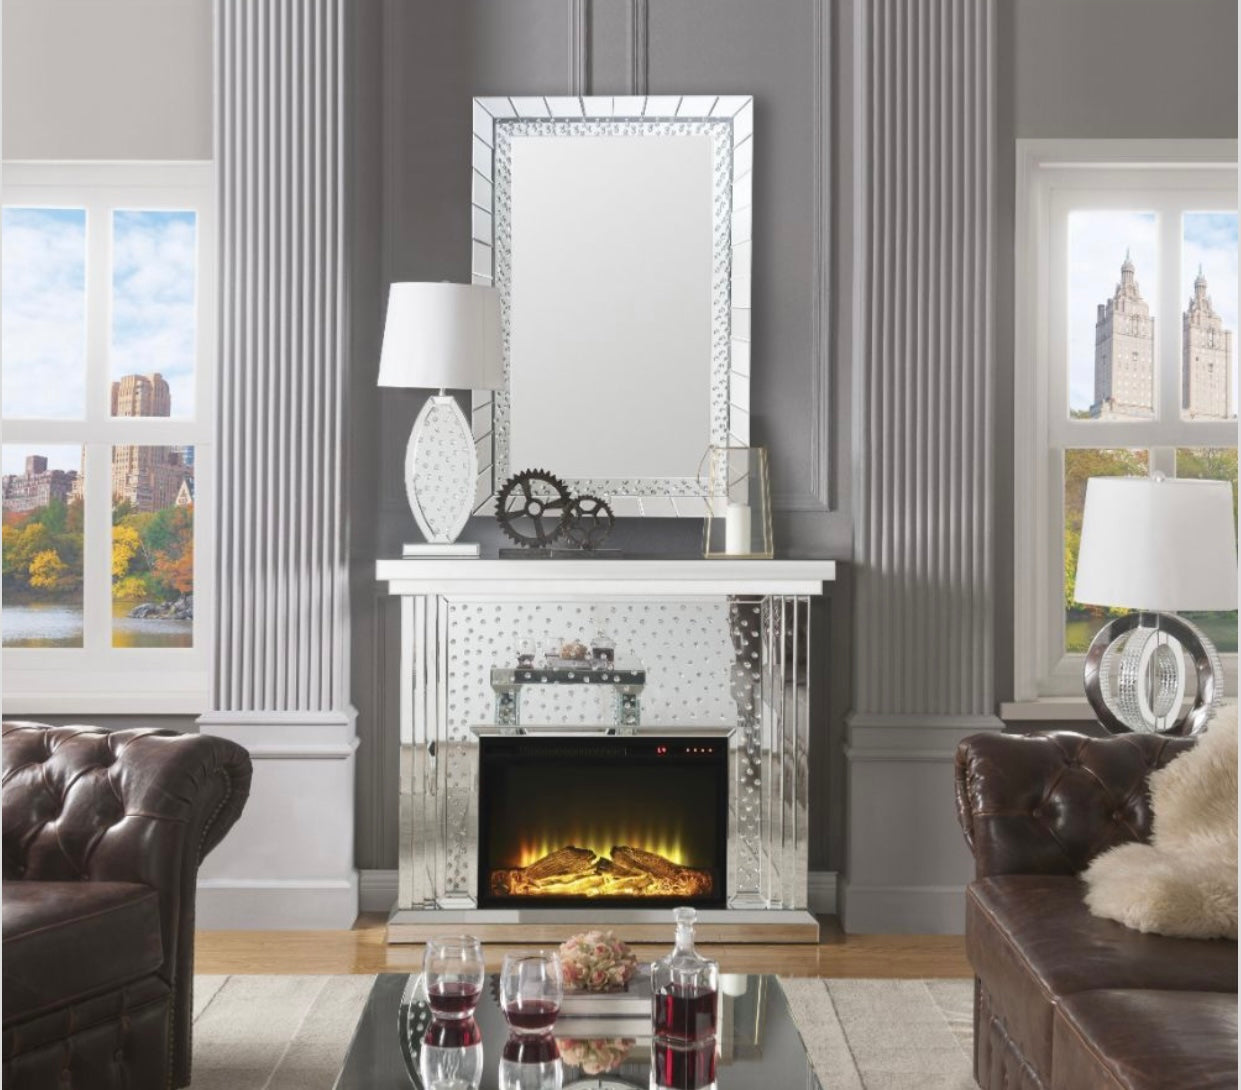 Noralie Fireplace 90868